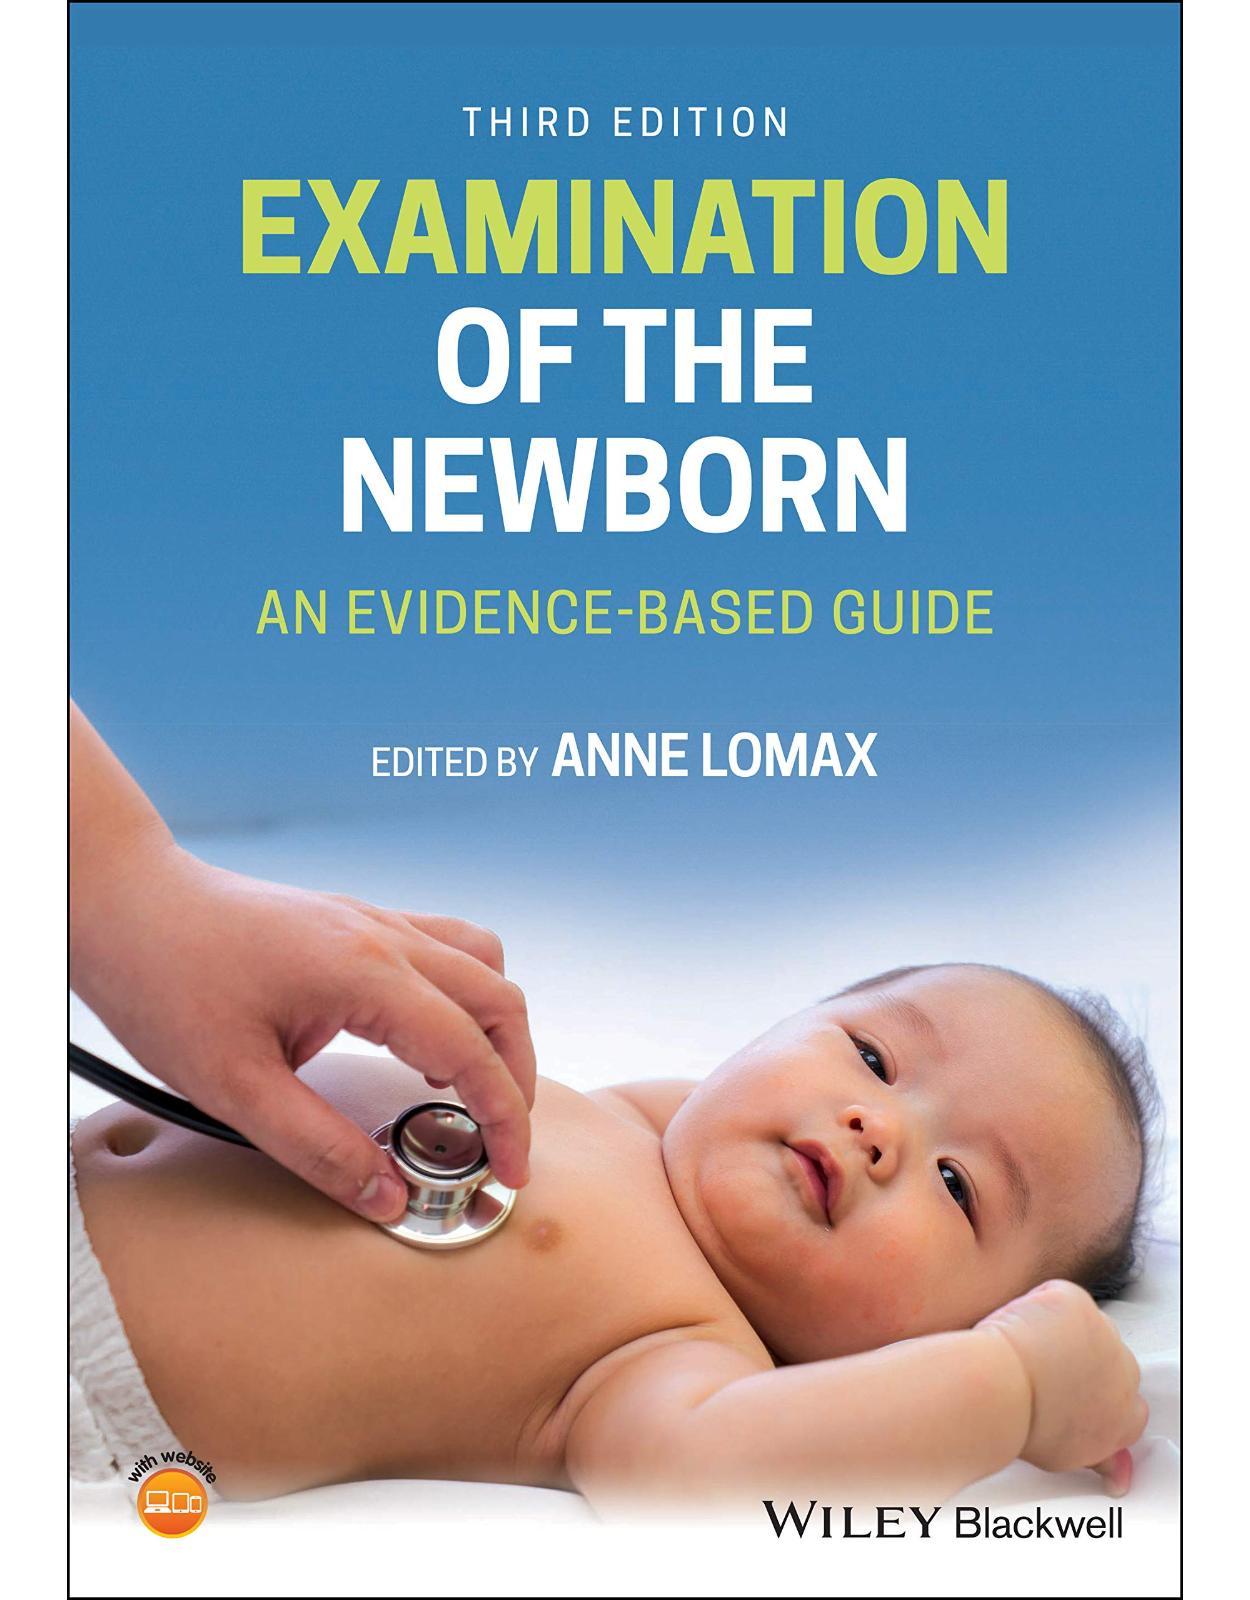 Examination of the Newborn: An Evidence-Based Guide, 3rd Edition